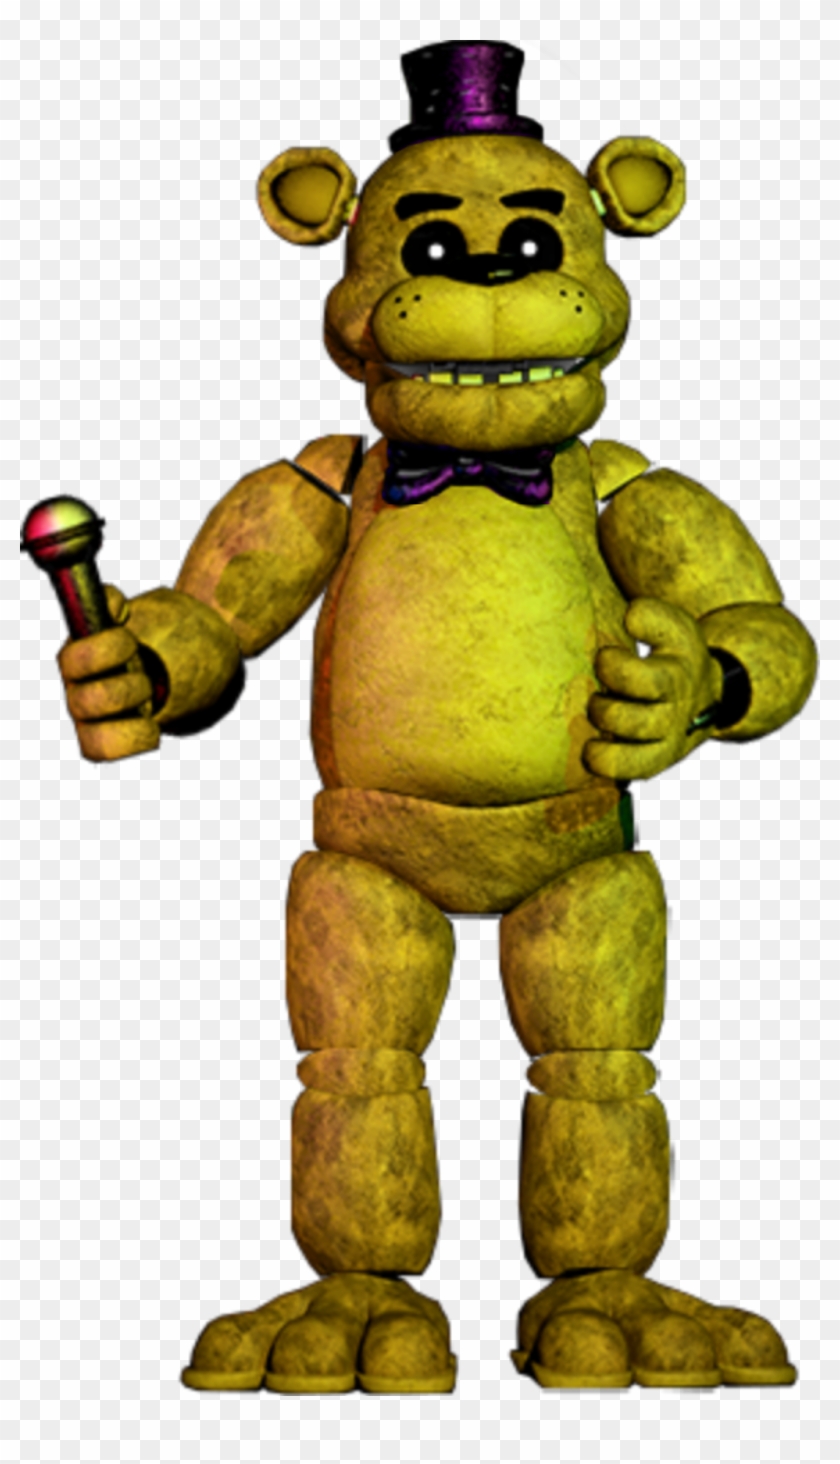 Fredbear Image - Five Nights At Freddy's Png Clipart #5809671